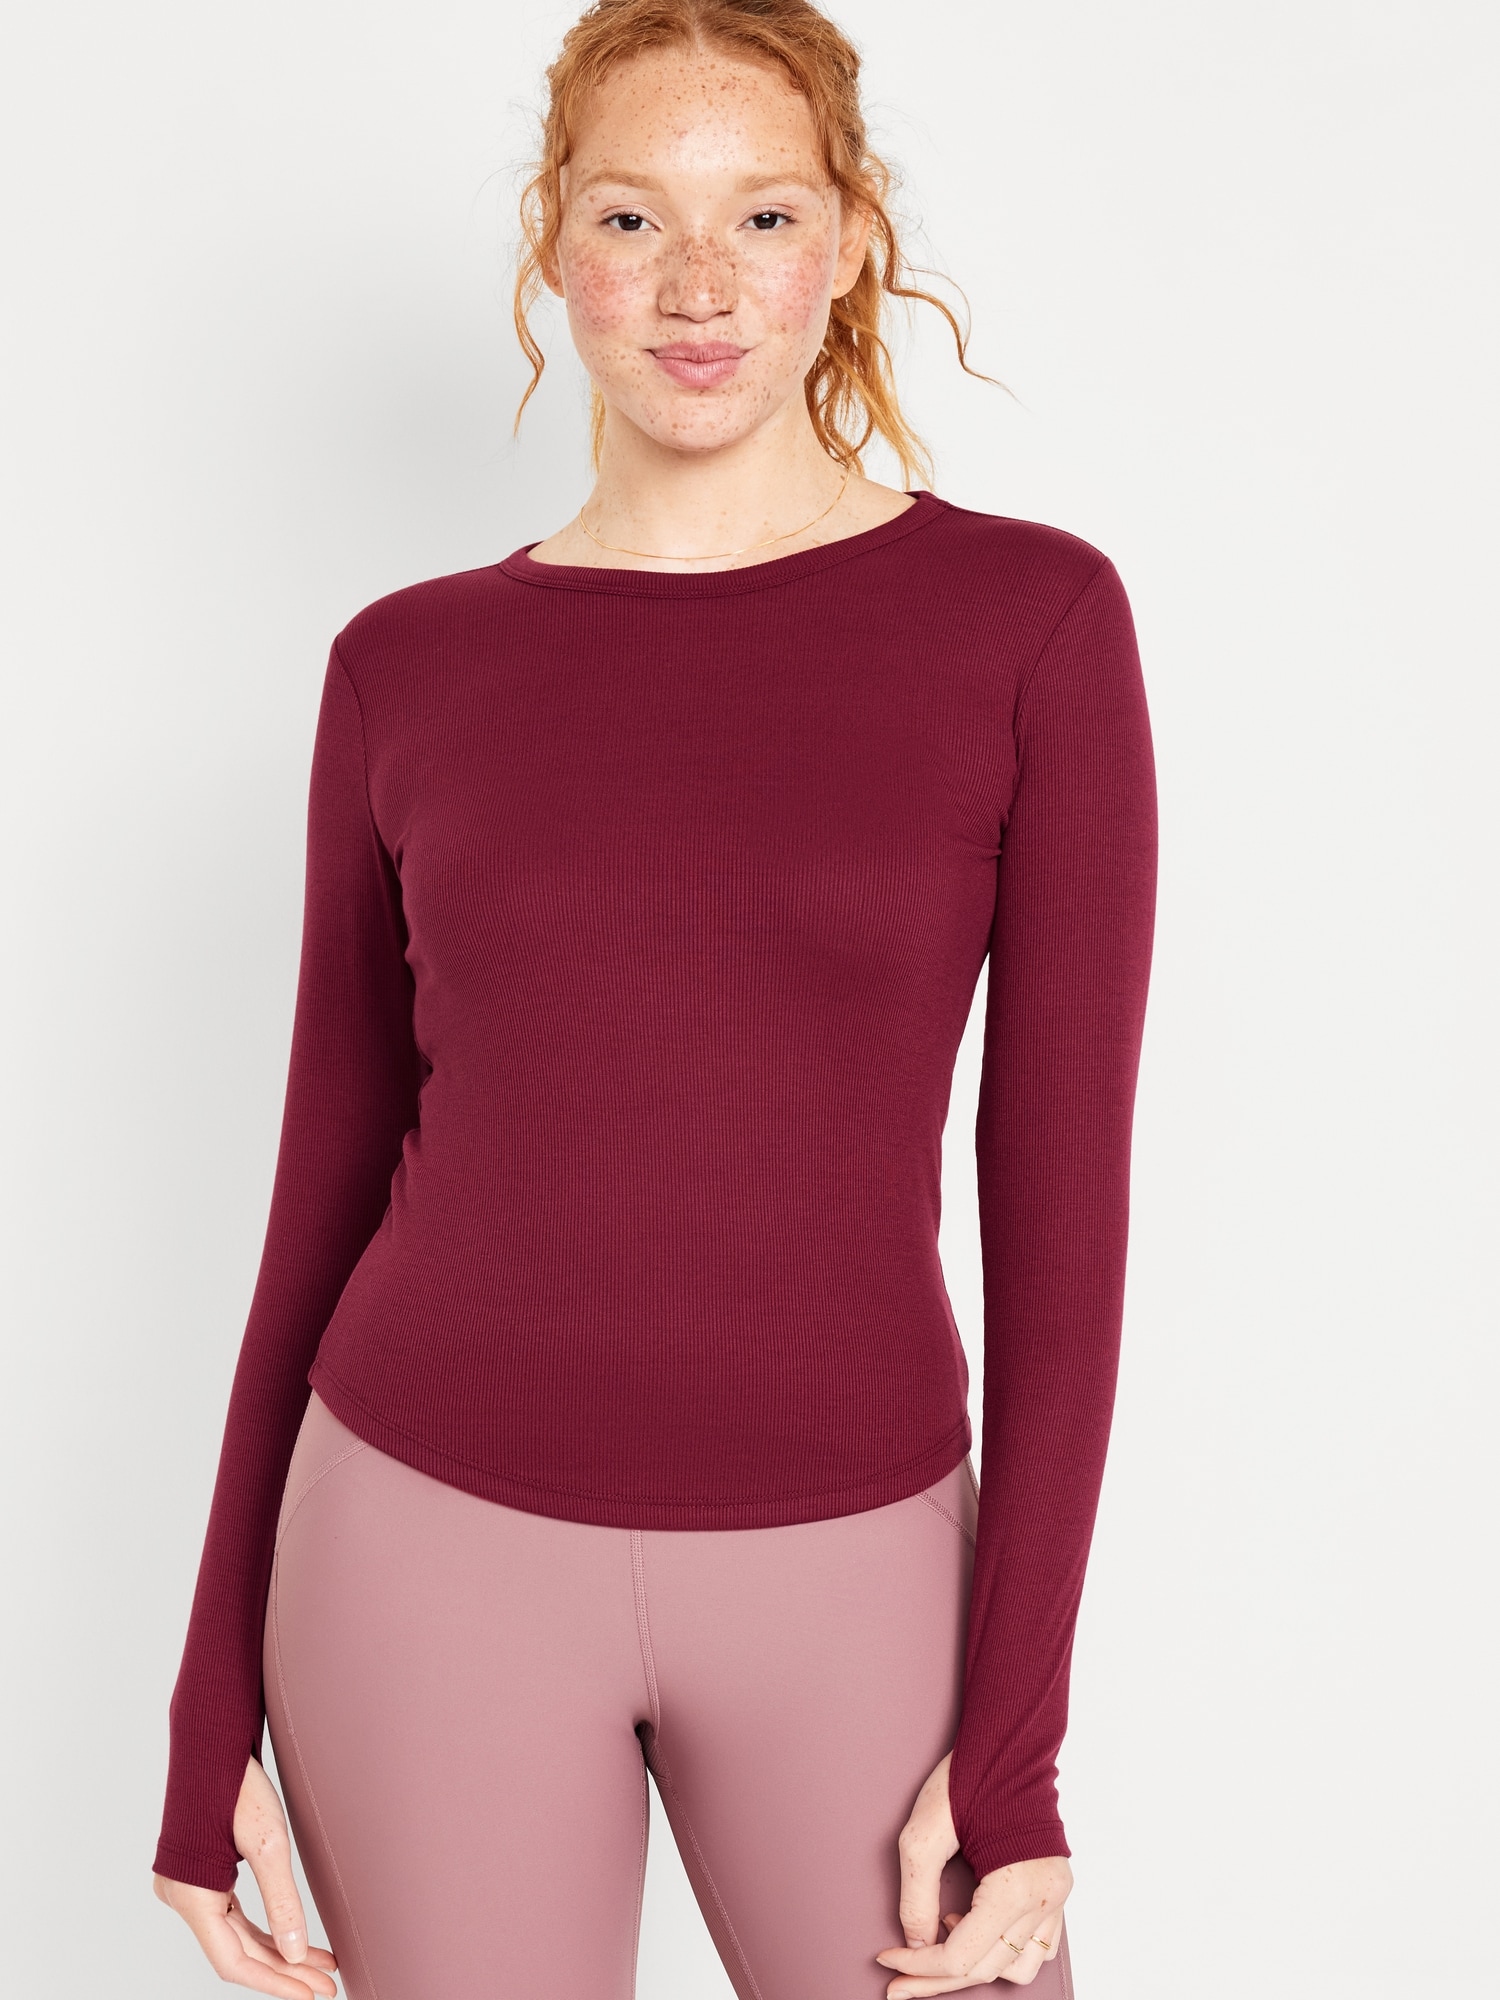 UltraLite Fitted Rib-Knit Top